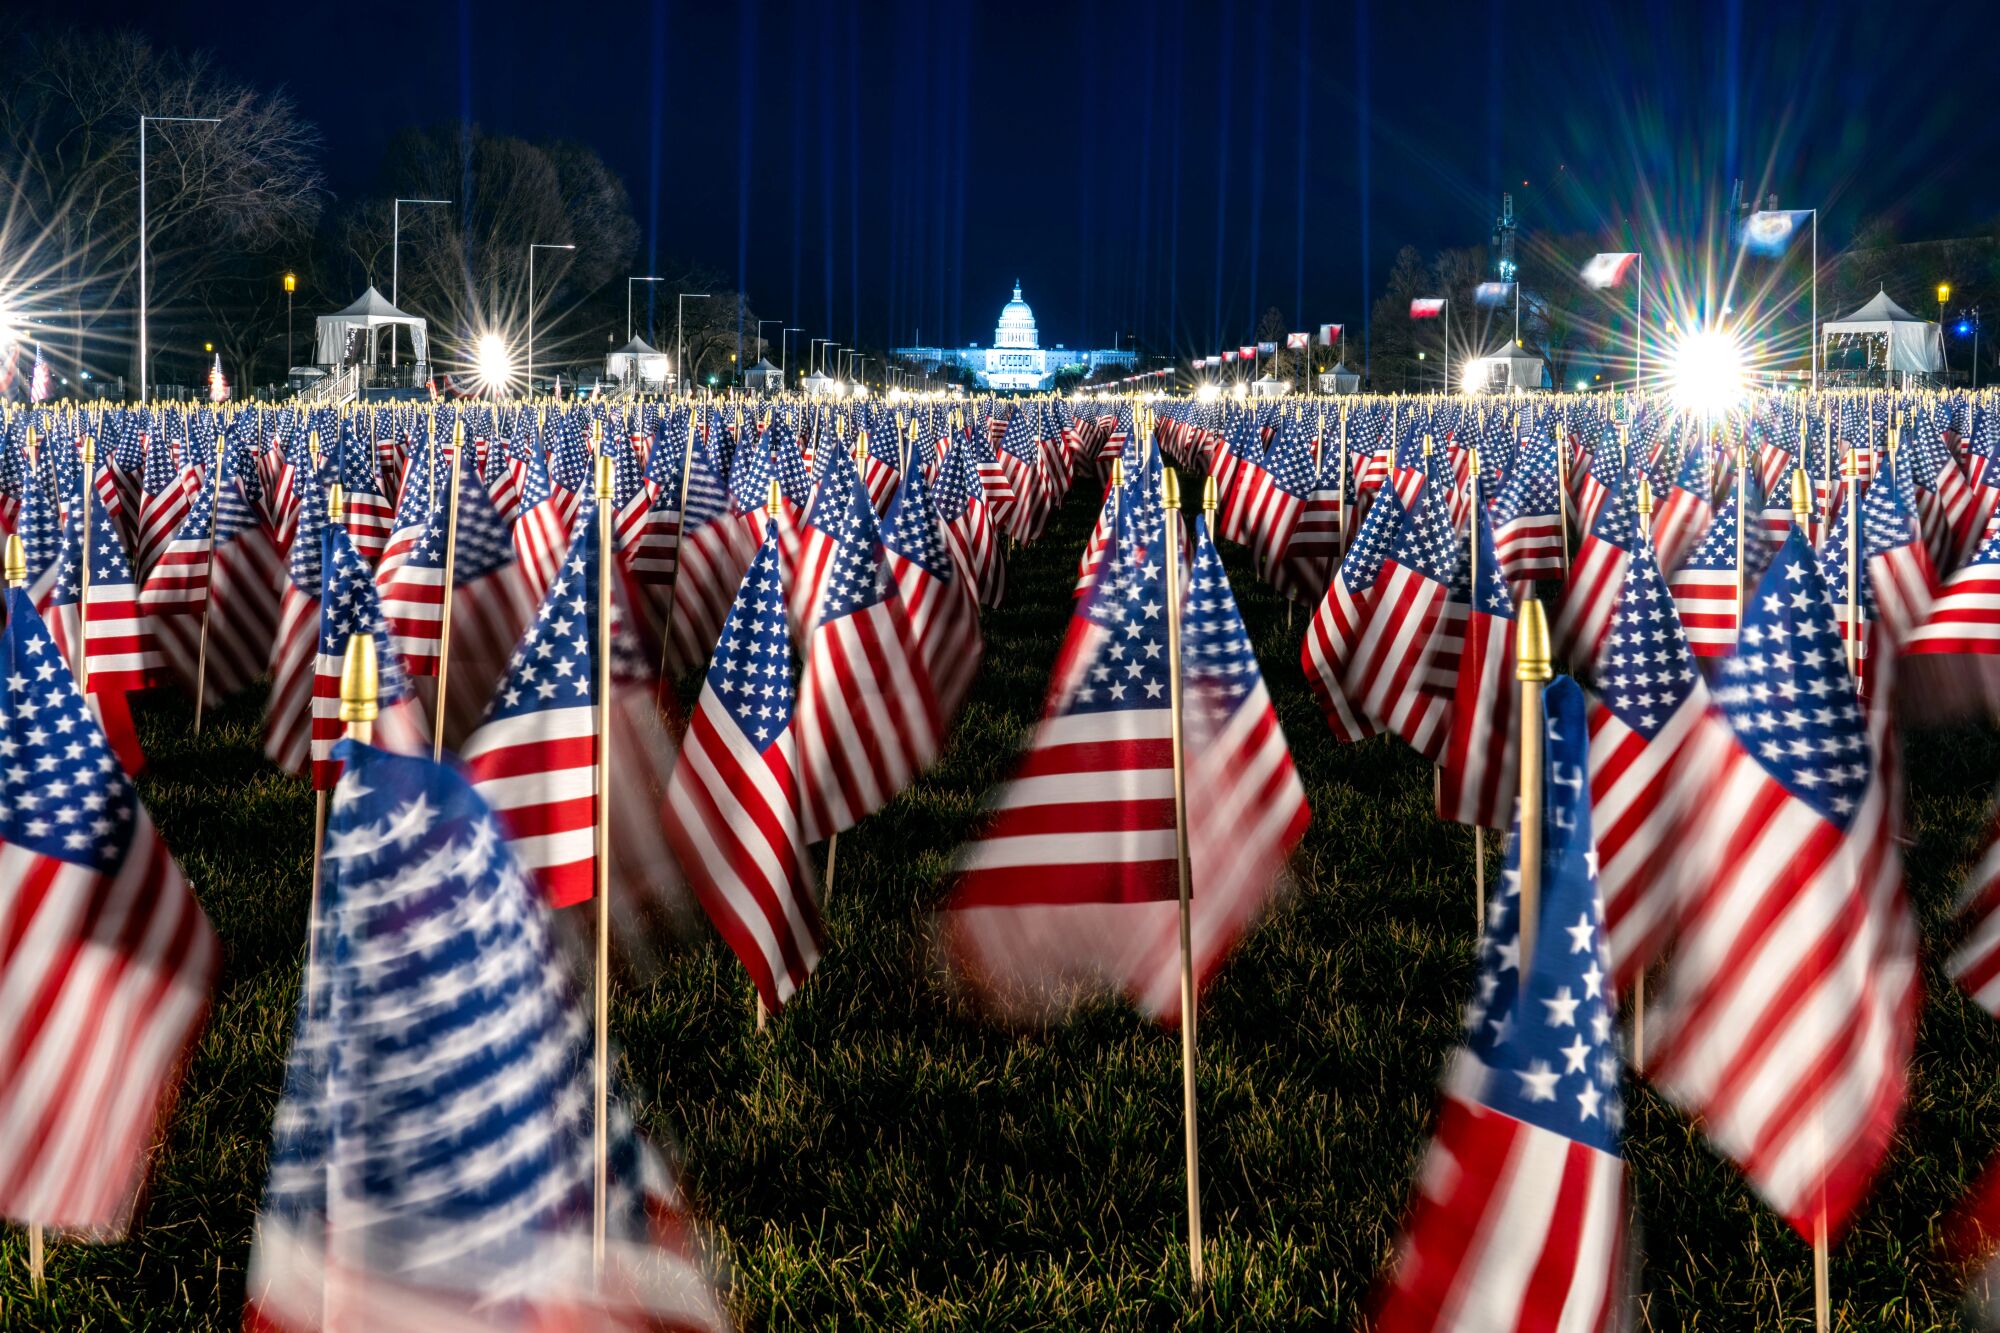 Small American flags fill a grassy field, with the U.S. Capitol far in the background.